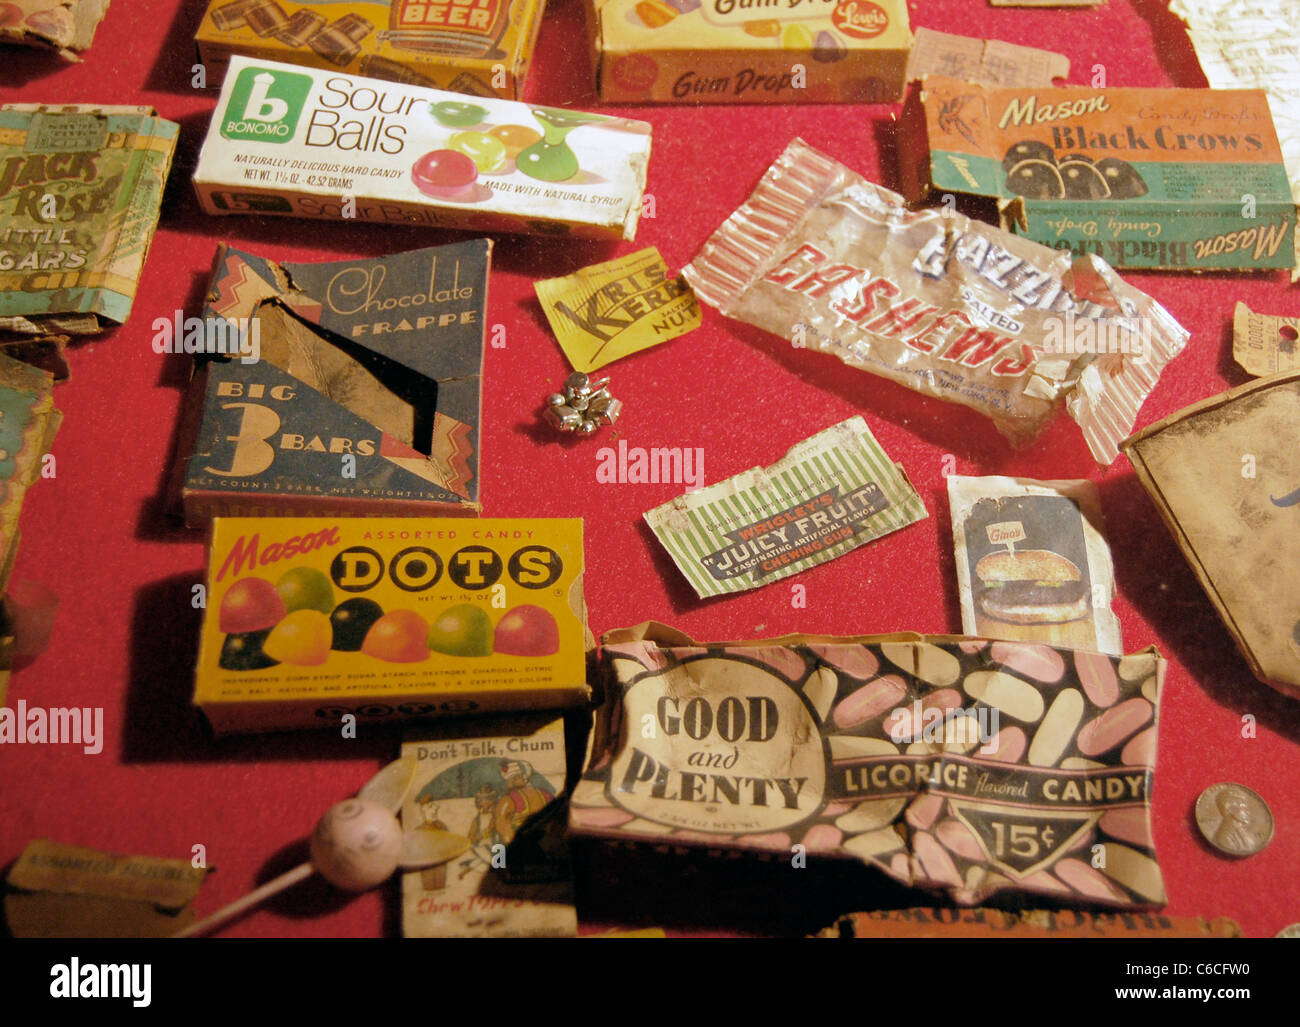 Loew's Jersey City, vintage candy wrappers Stock Photo